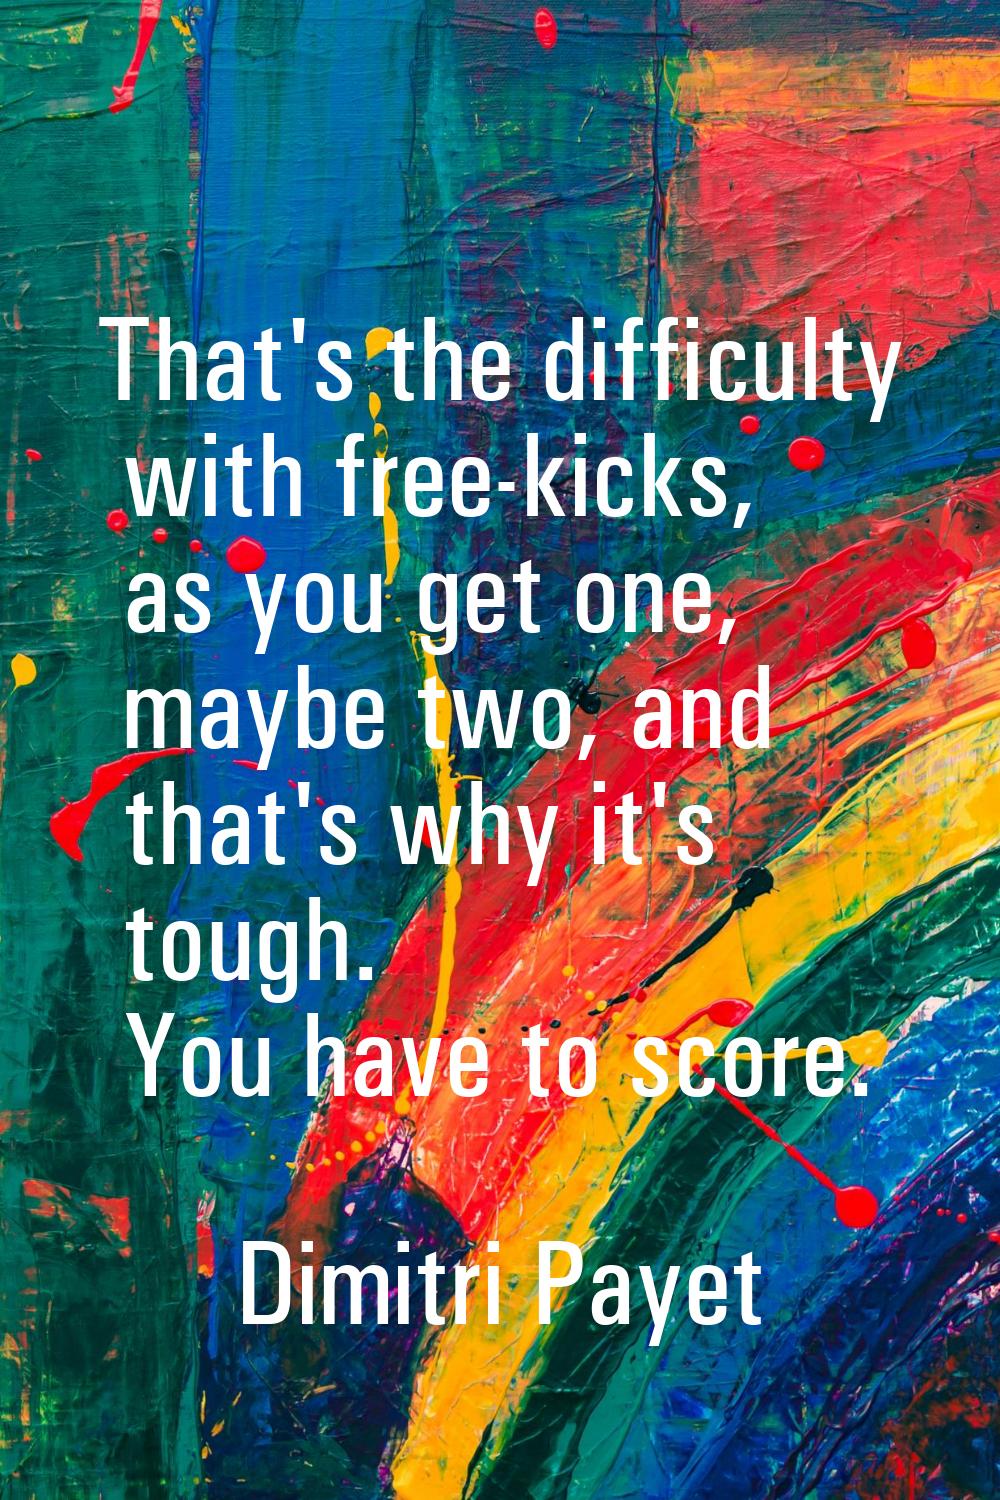 That's the difficulty with free-kicks, as you get one, maybe two, and that's why it's tough. You ha